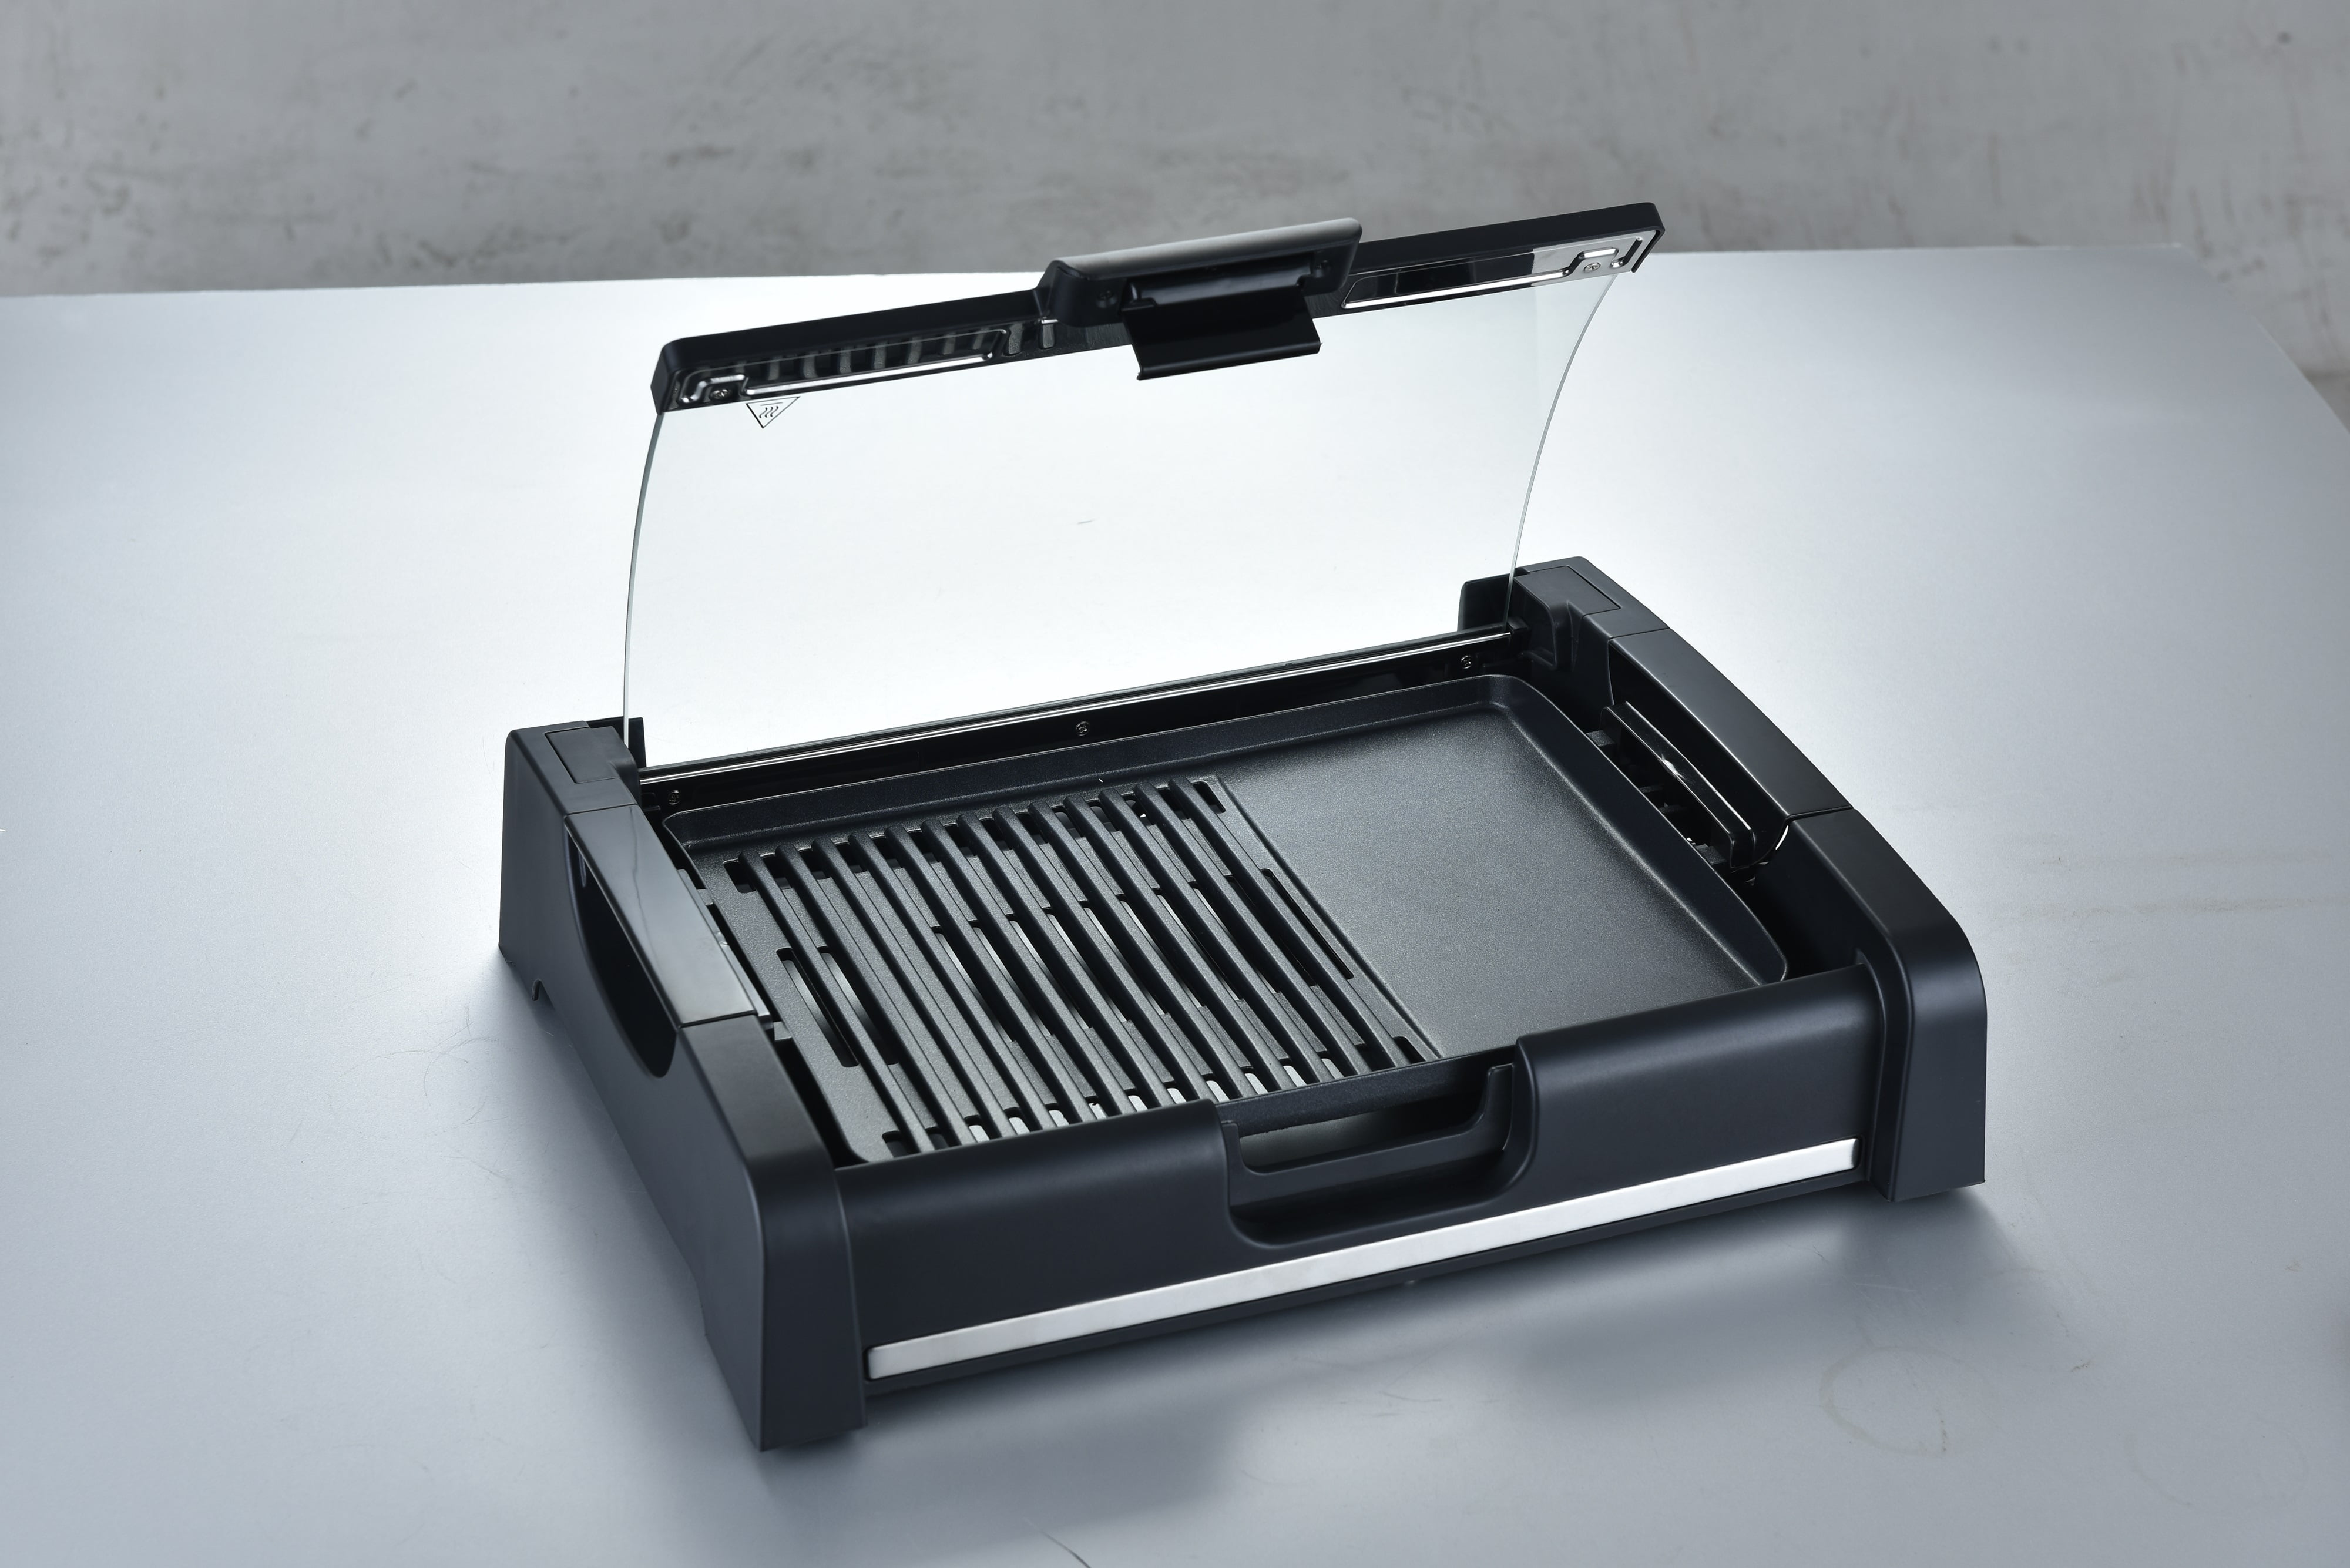 Indoor Grill-Smokeless Grill Electric Grill with Lid, Casting Nonstick  Griddle Pan, Led Temperature Control, Turbo Smoke Extractor Technology,2 in  1 Nonstick Removable Griddle Surface, 1400W, Detachable Design, Ideal for  dining together, Black. 